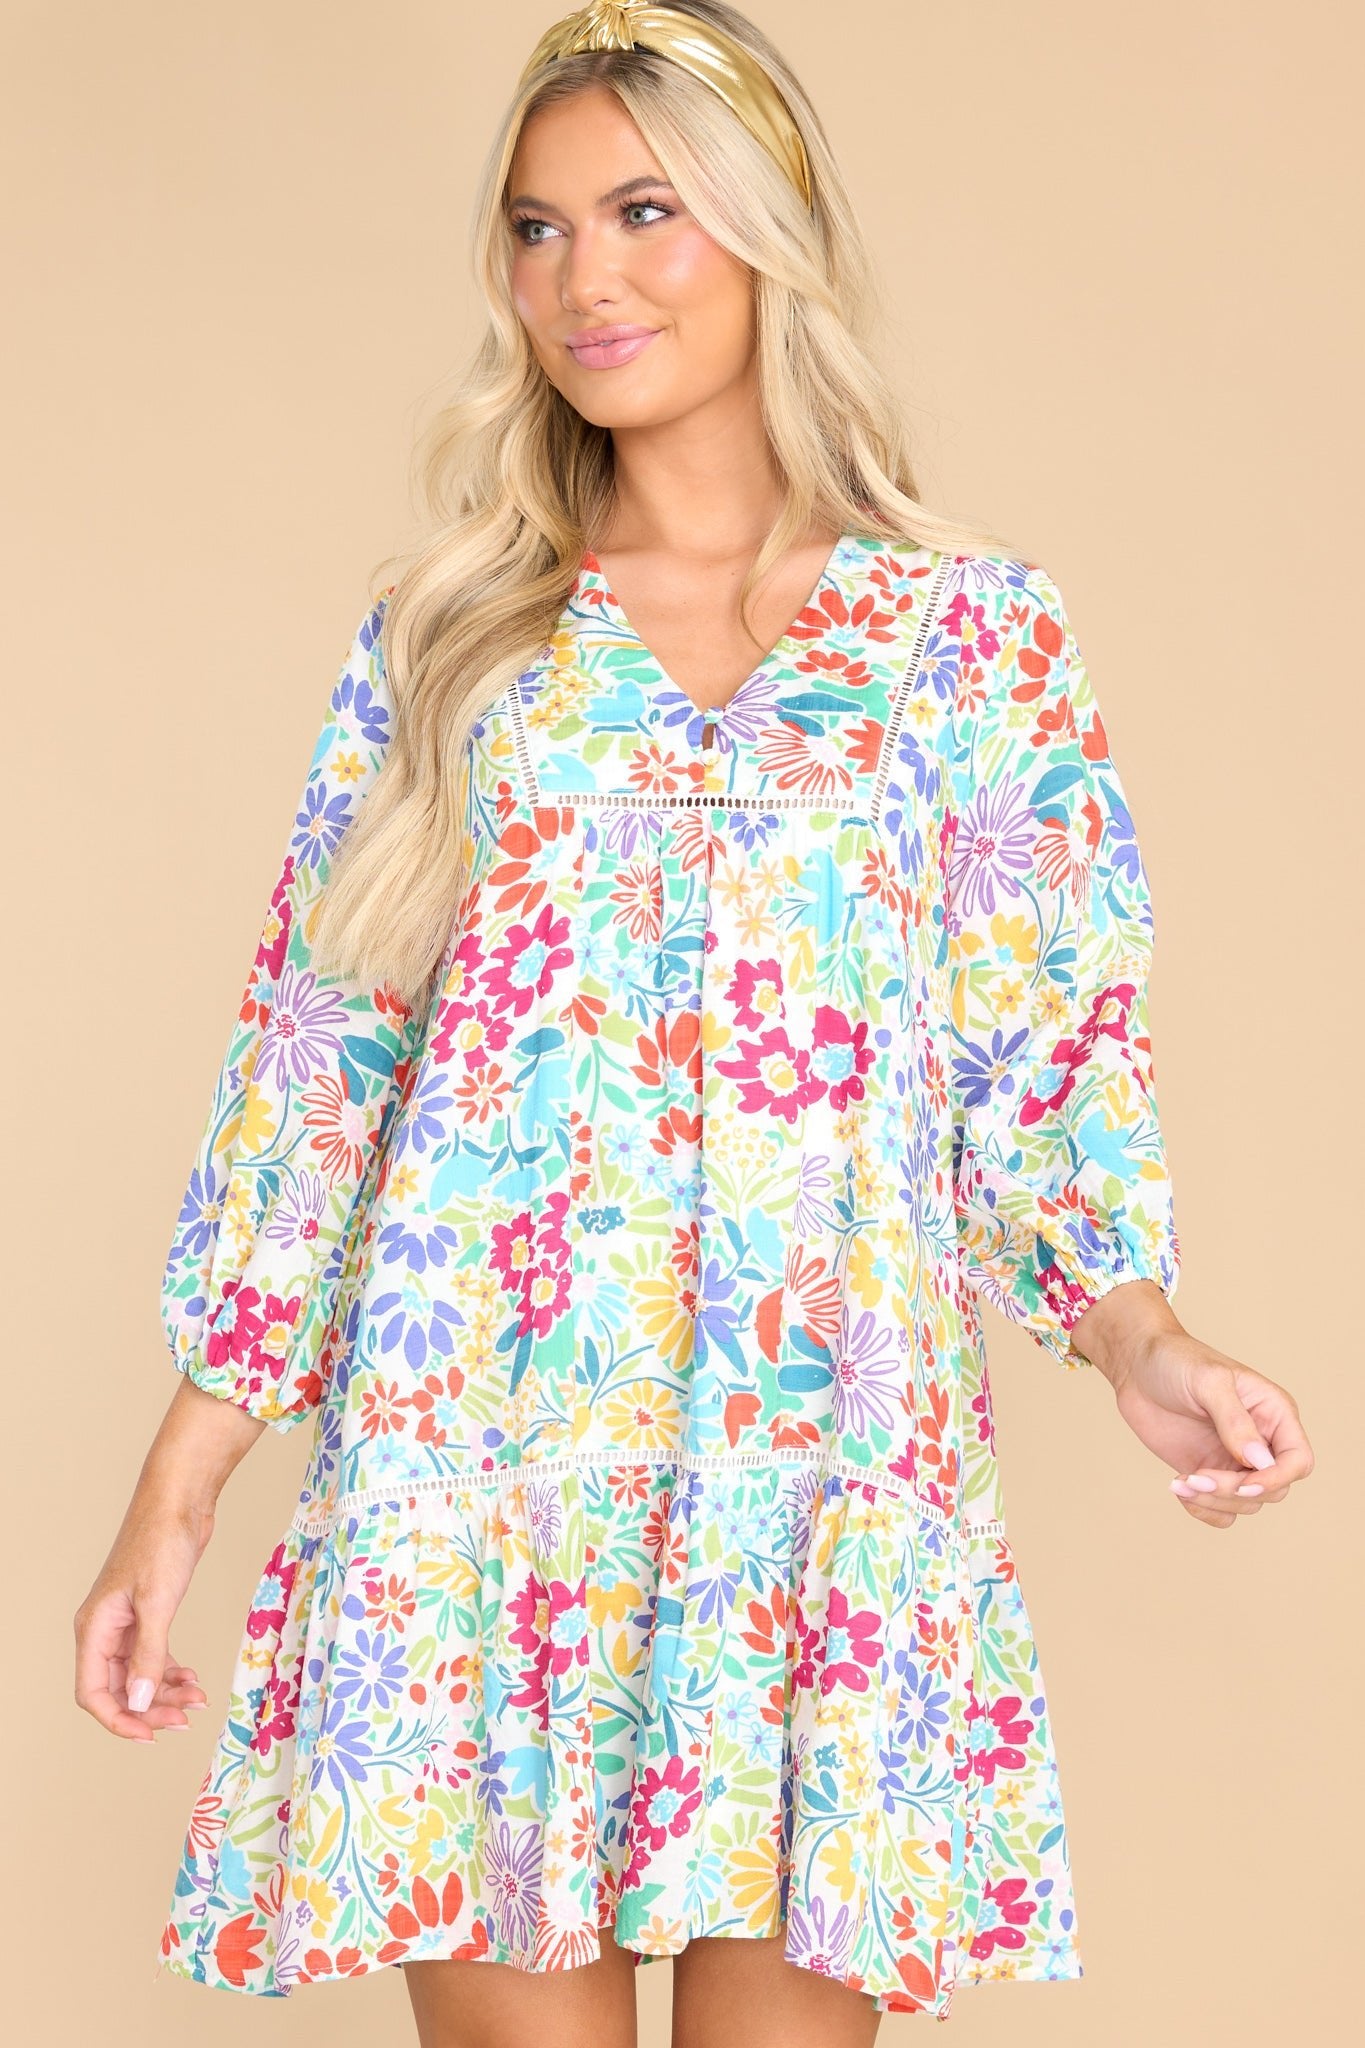 Bursting With Color White Floral Print Dress - Red Dress